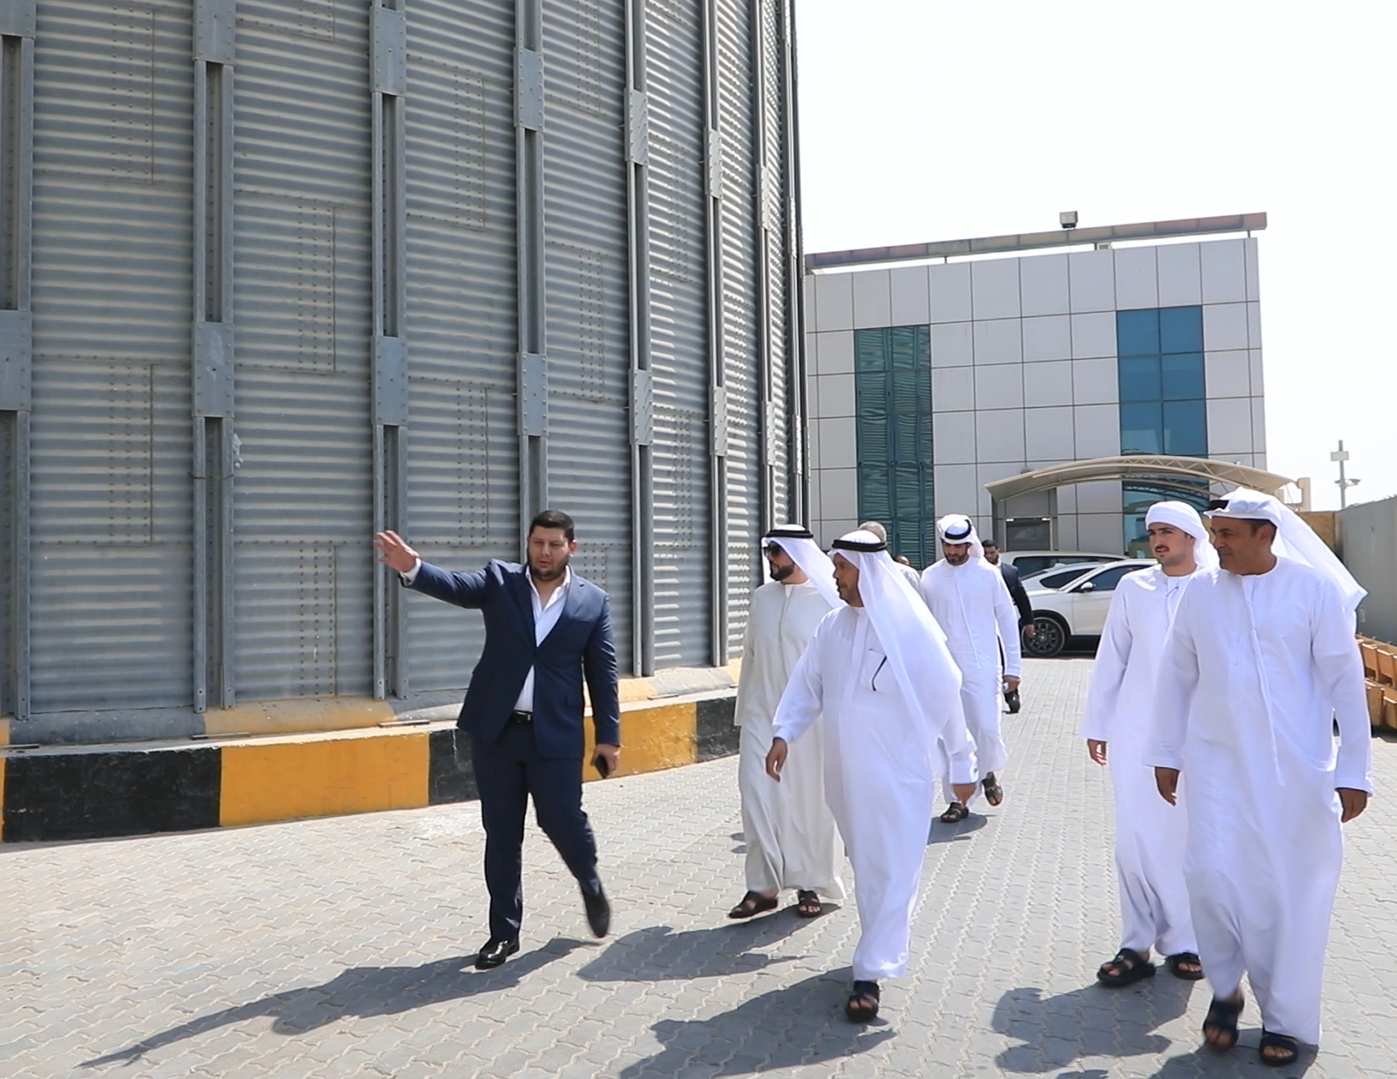 106 visits to factories and companies were made by the Ajman Chamber in 2023